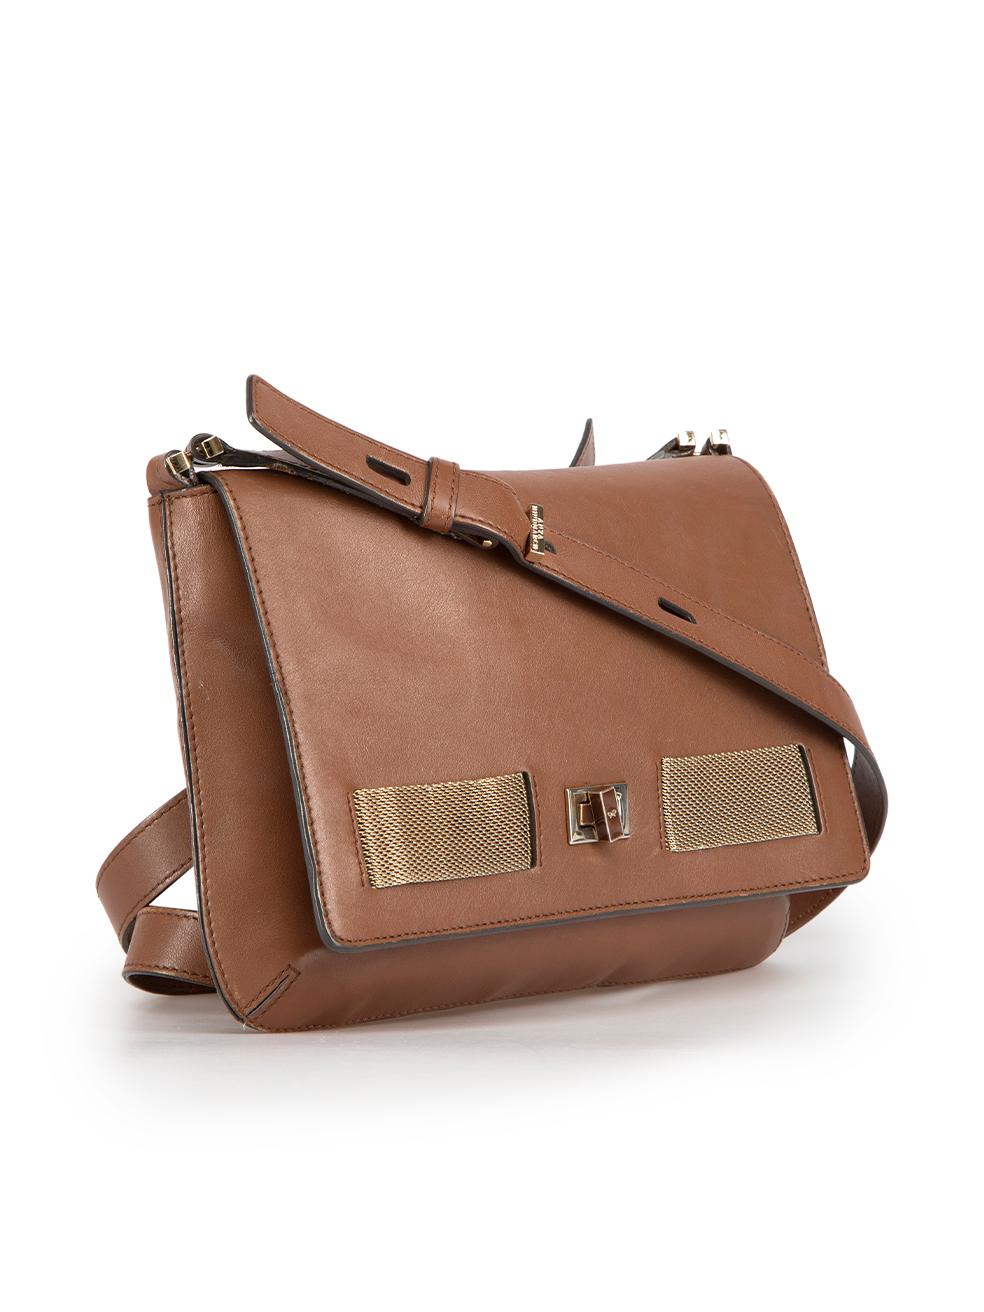 CONDITION is Very good. Minimal wear to bag is evident. Minimal wear to the rear with light scratch marks to the leather and warped link in the front chain detail on this used Anya Hindmarch designer resale item.
 
Details
Prancer
Brown
Leather
Mini